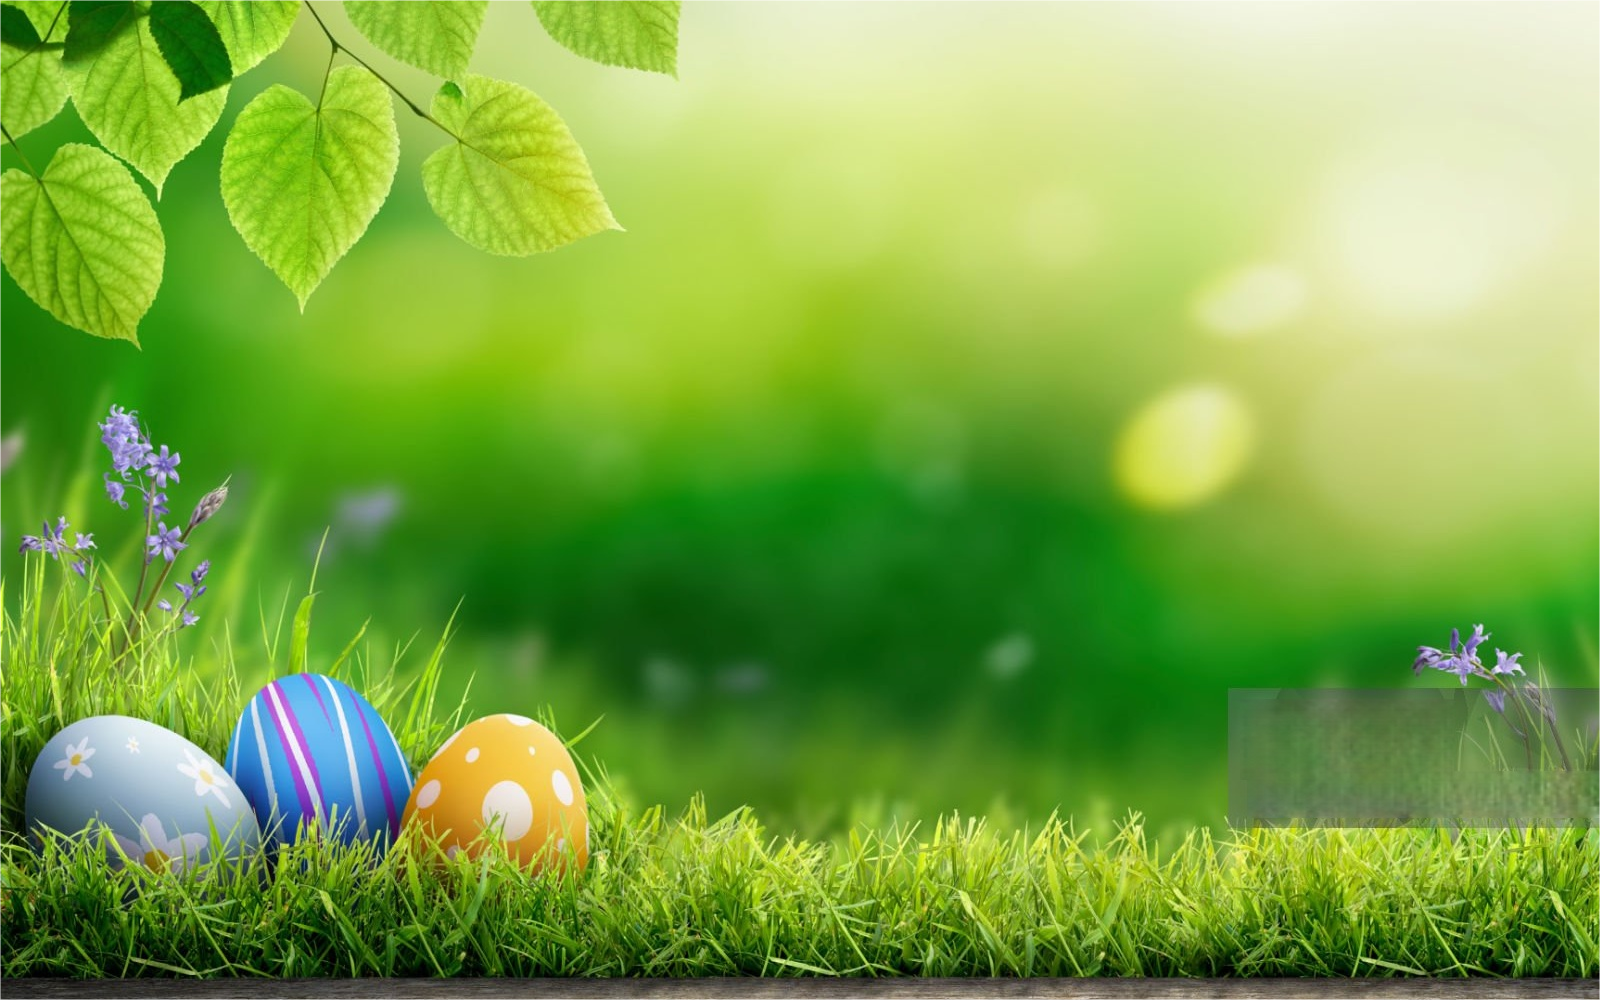 Happy Easter: How to Make the Most of the Holiday Outdoors